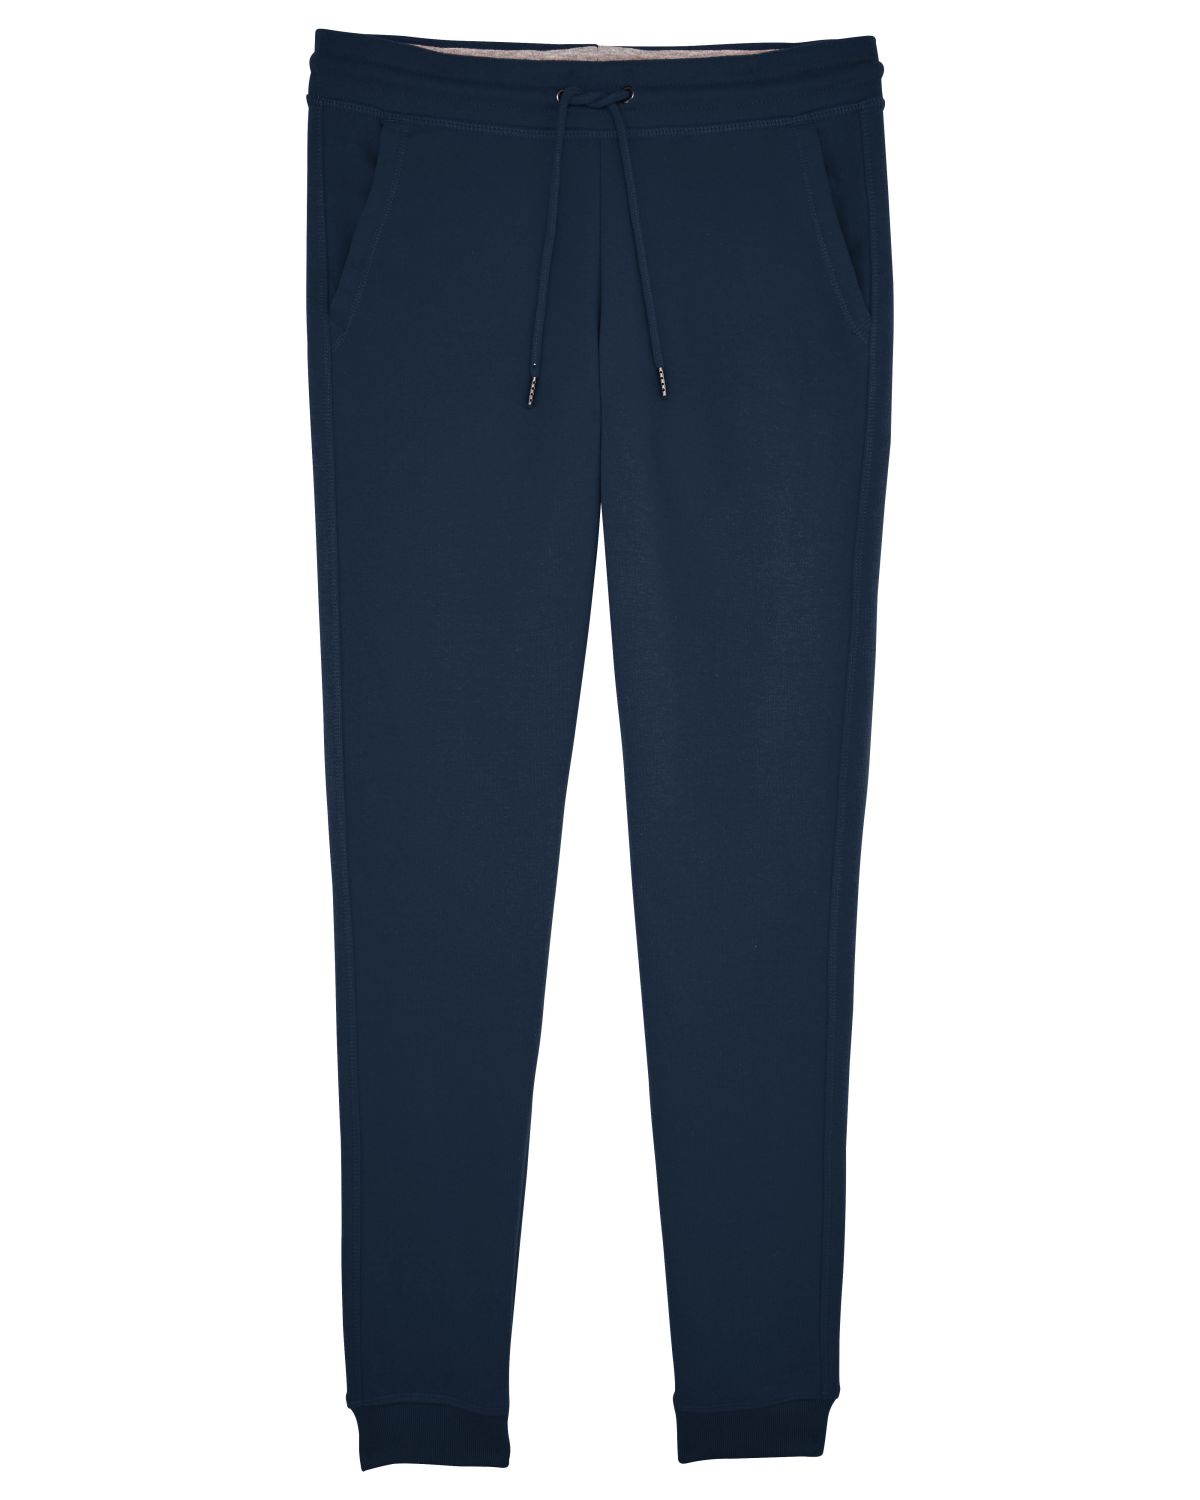 Stanley/Stella's - Stella Traces Jogging Pants - French Navy